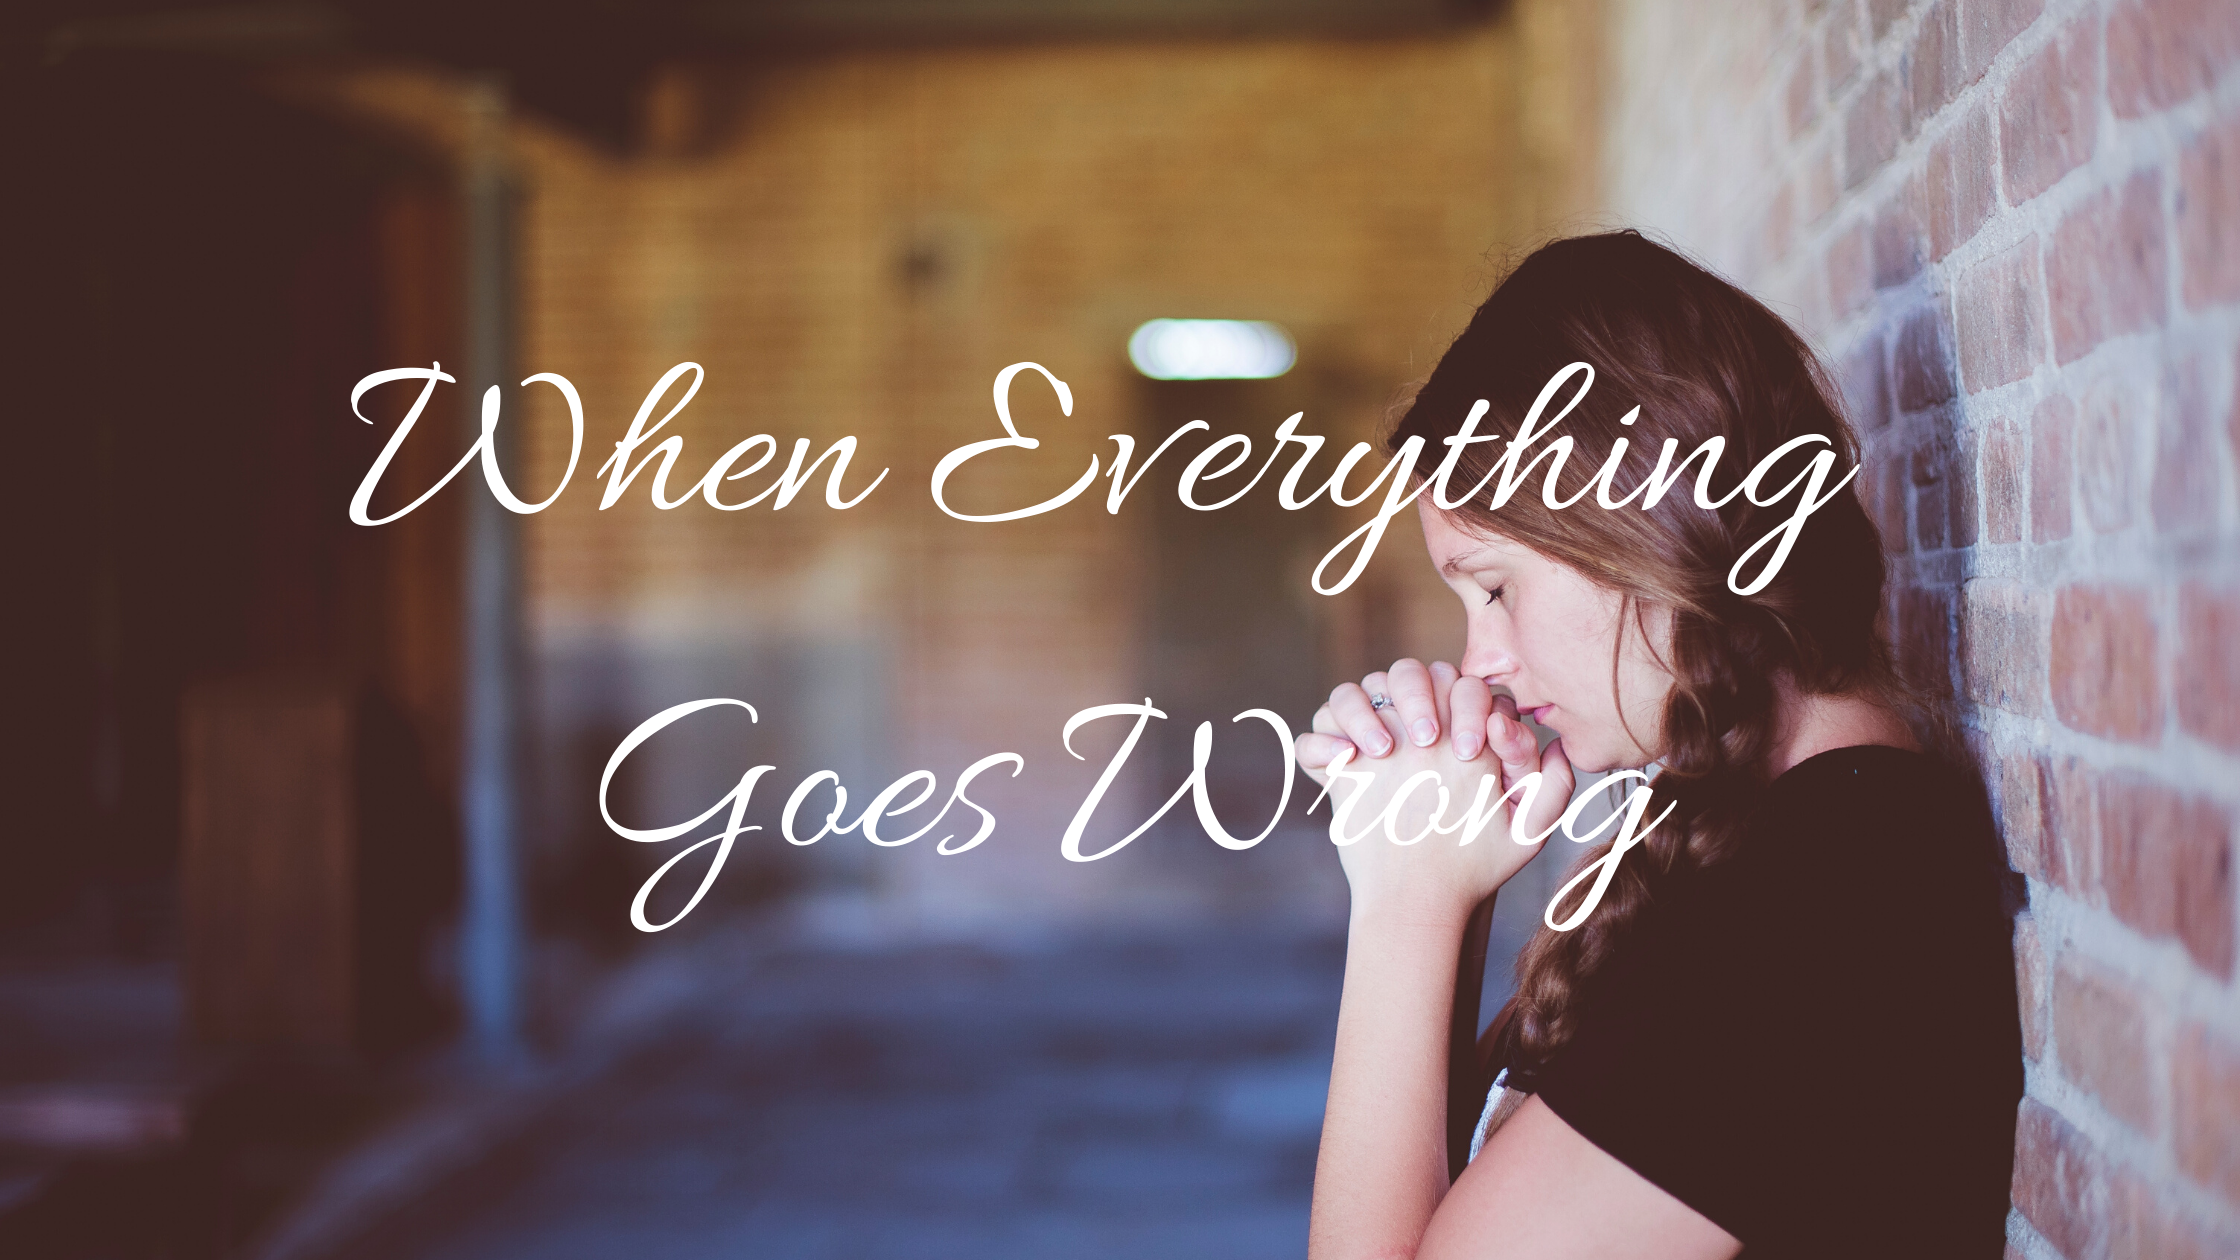 When Everything Goes Wrong blog title with woman praying in background